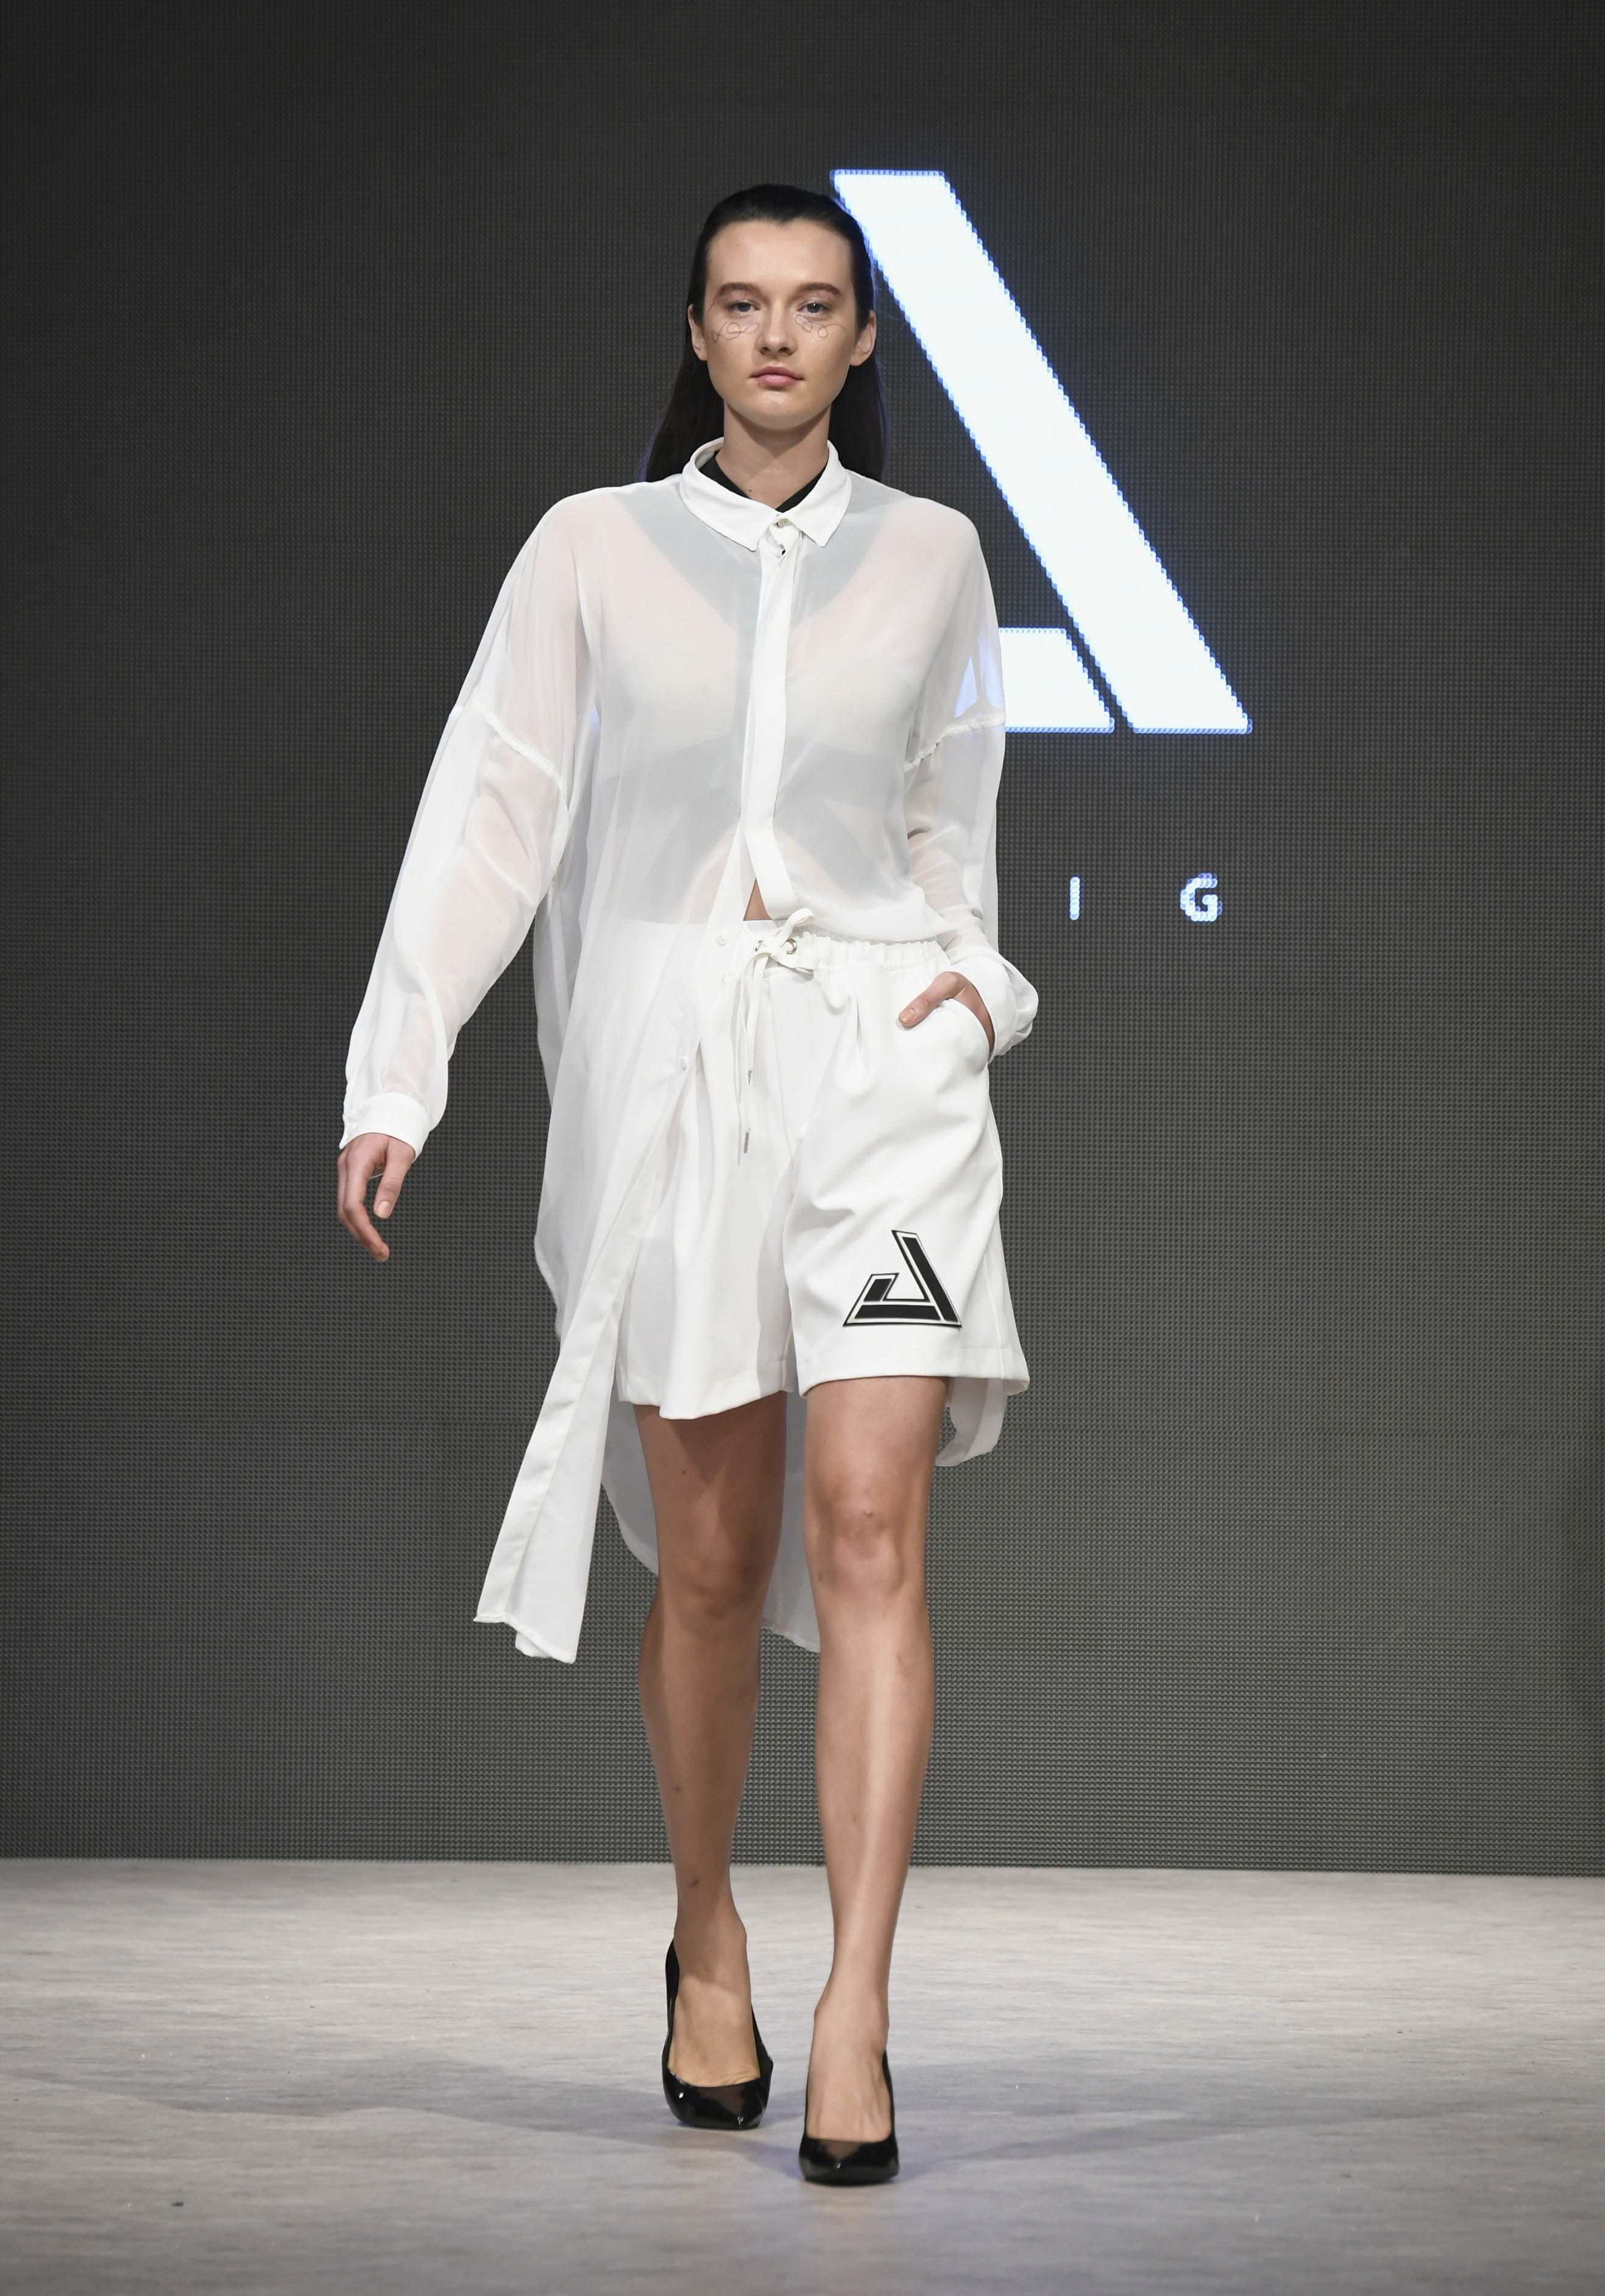 VANCOUVER, BC - SEPTEMBER 21:  A model walks the runway wearing JNORIG at Vancouver Fashion Week Spring/Summer 19 - Day 5 on September 21, 2018 in Vancouver, Canada.  (Photo by Arun Nevader/Getty Images for VFW Management INC)